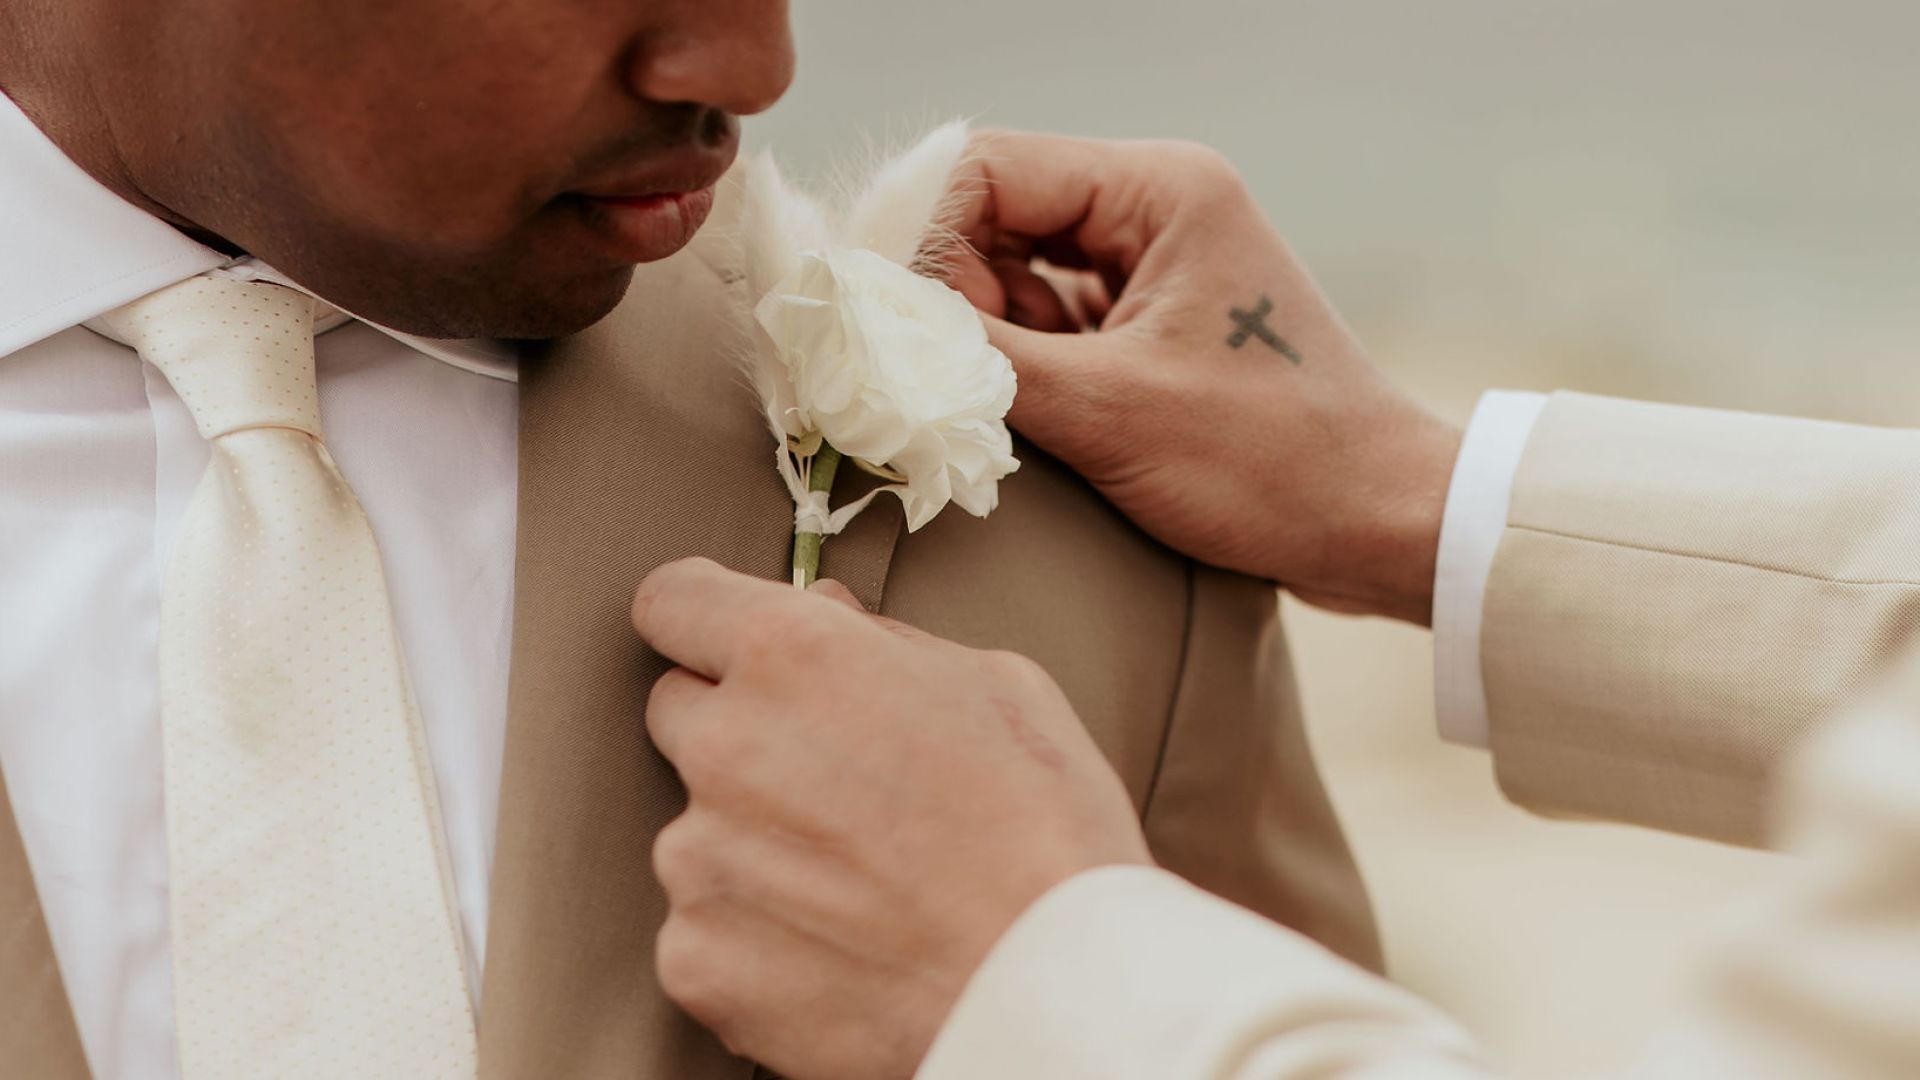 A Person In A Suit Holding A White Flower